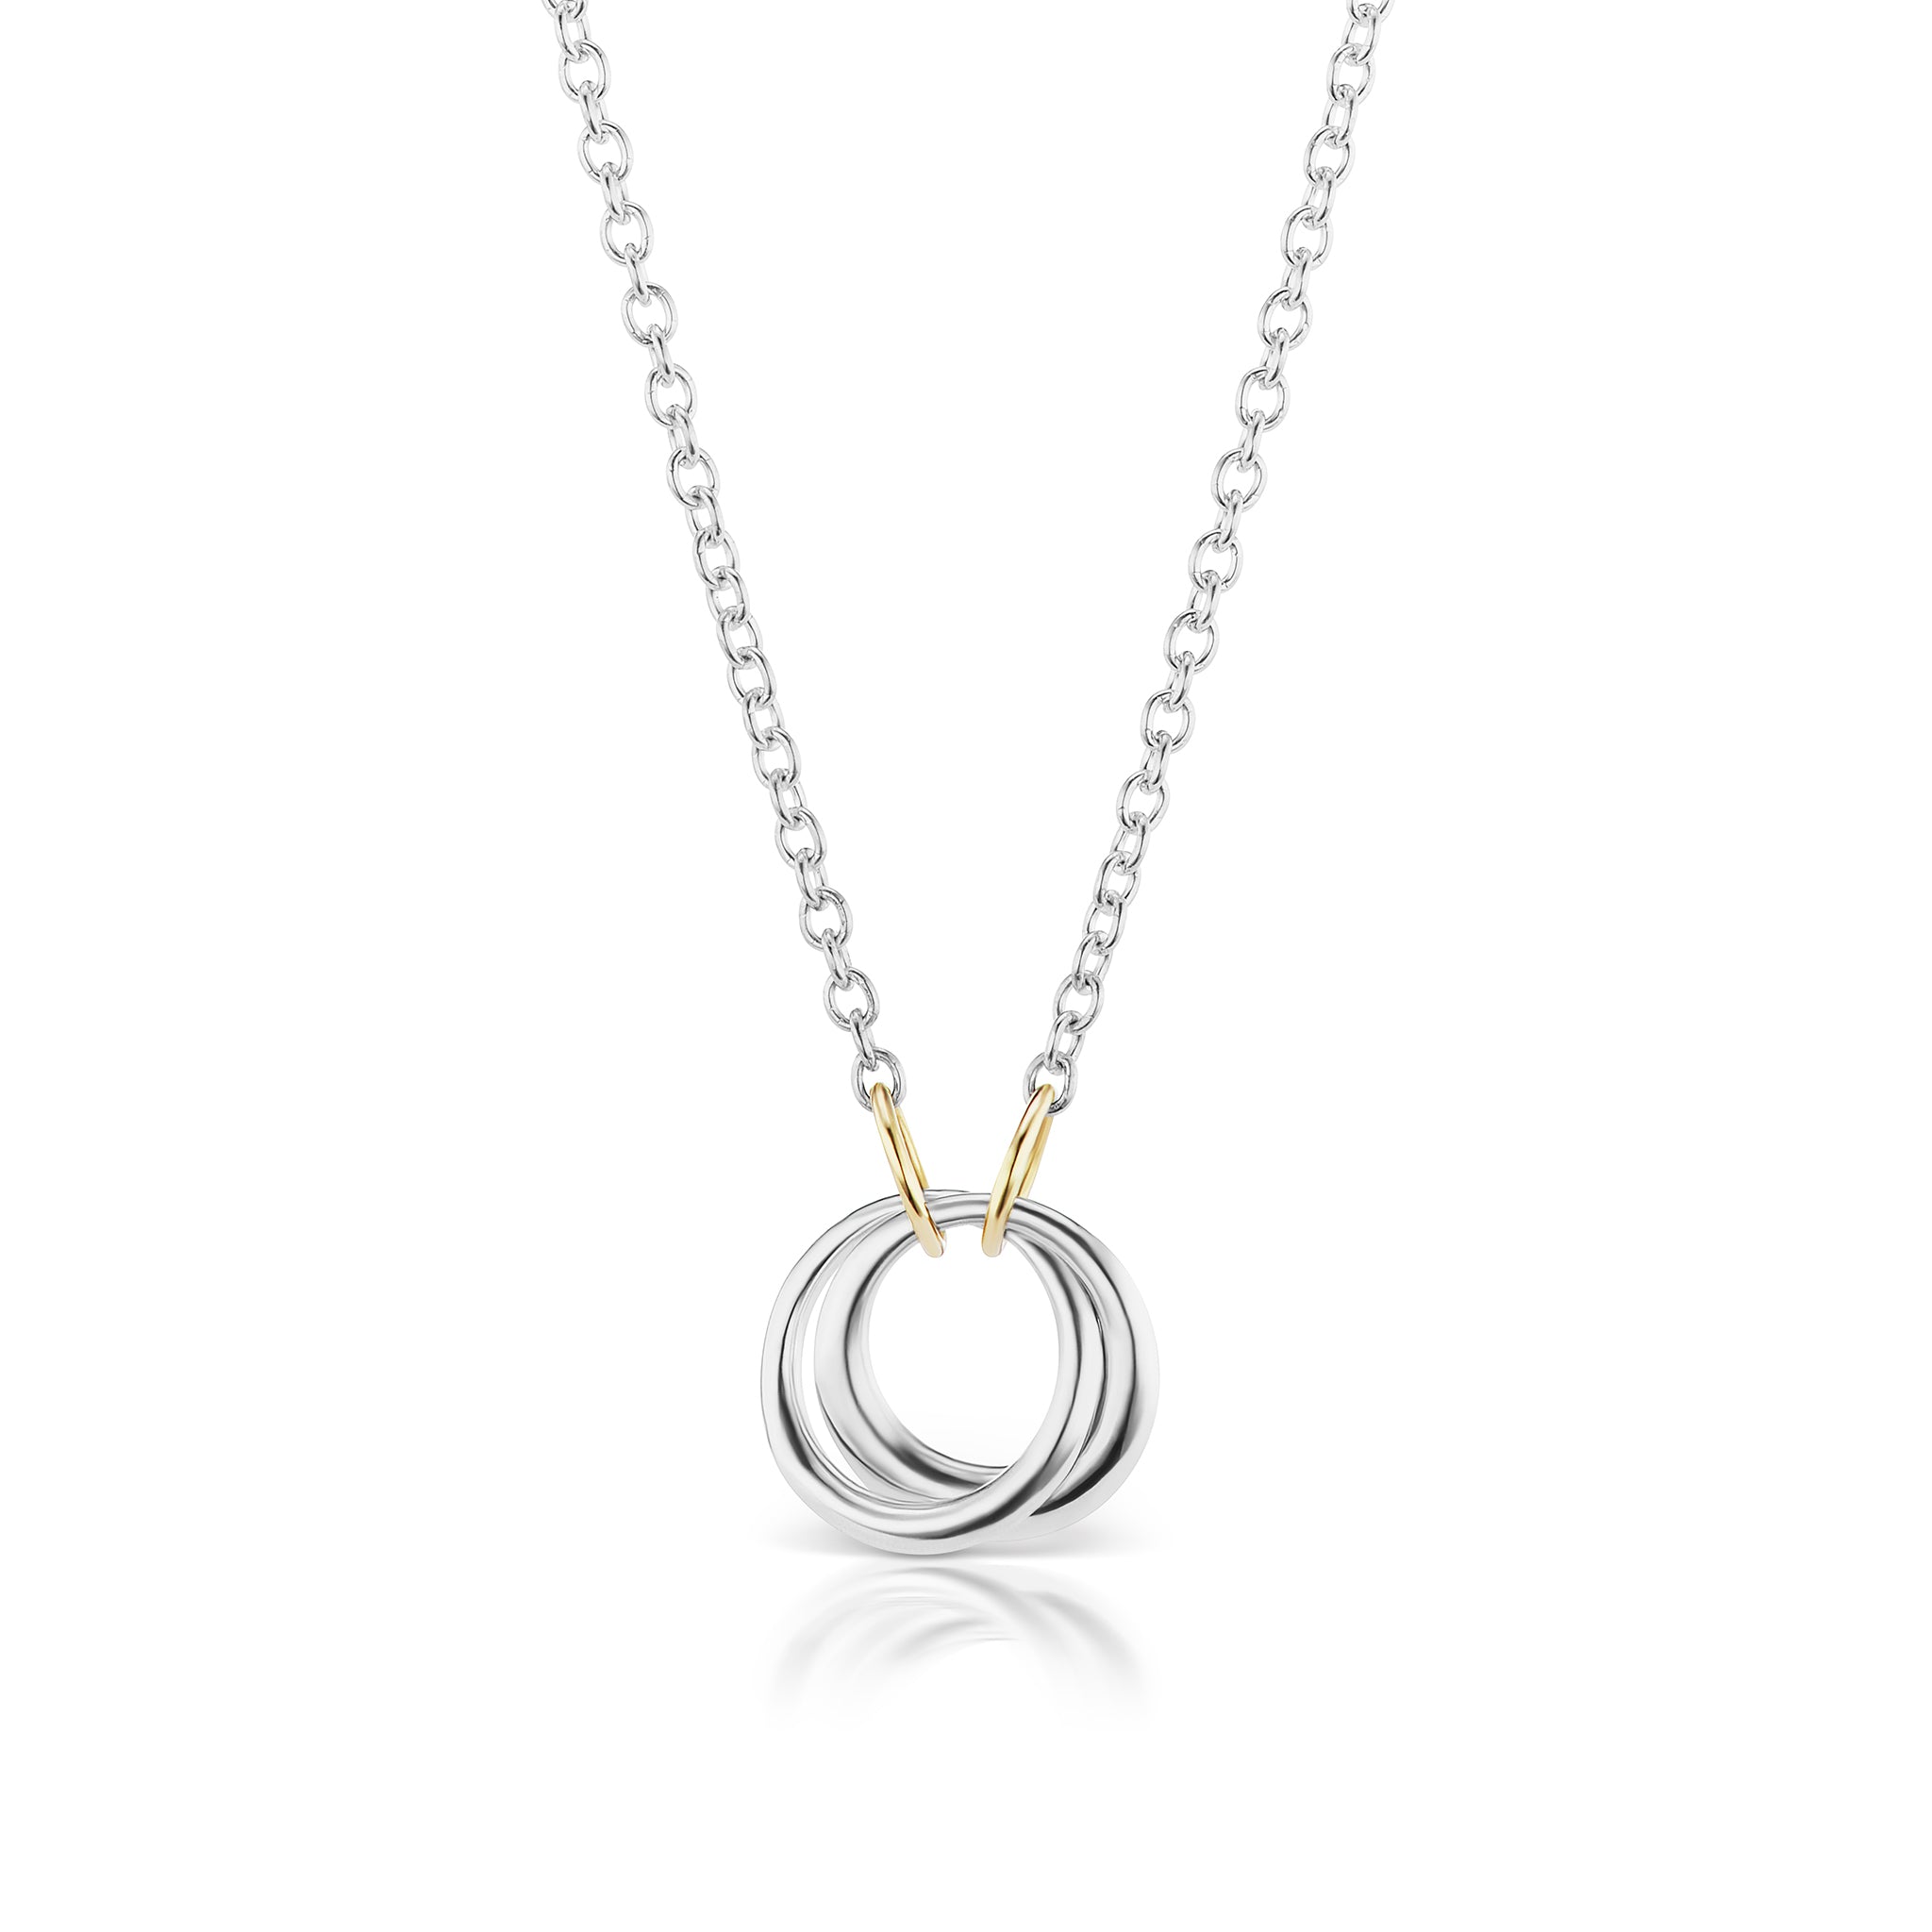 The Silver Encircle Necklace